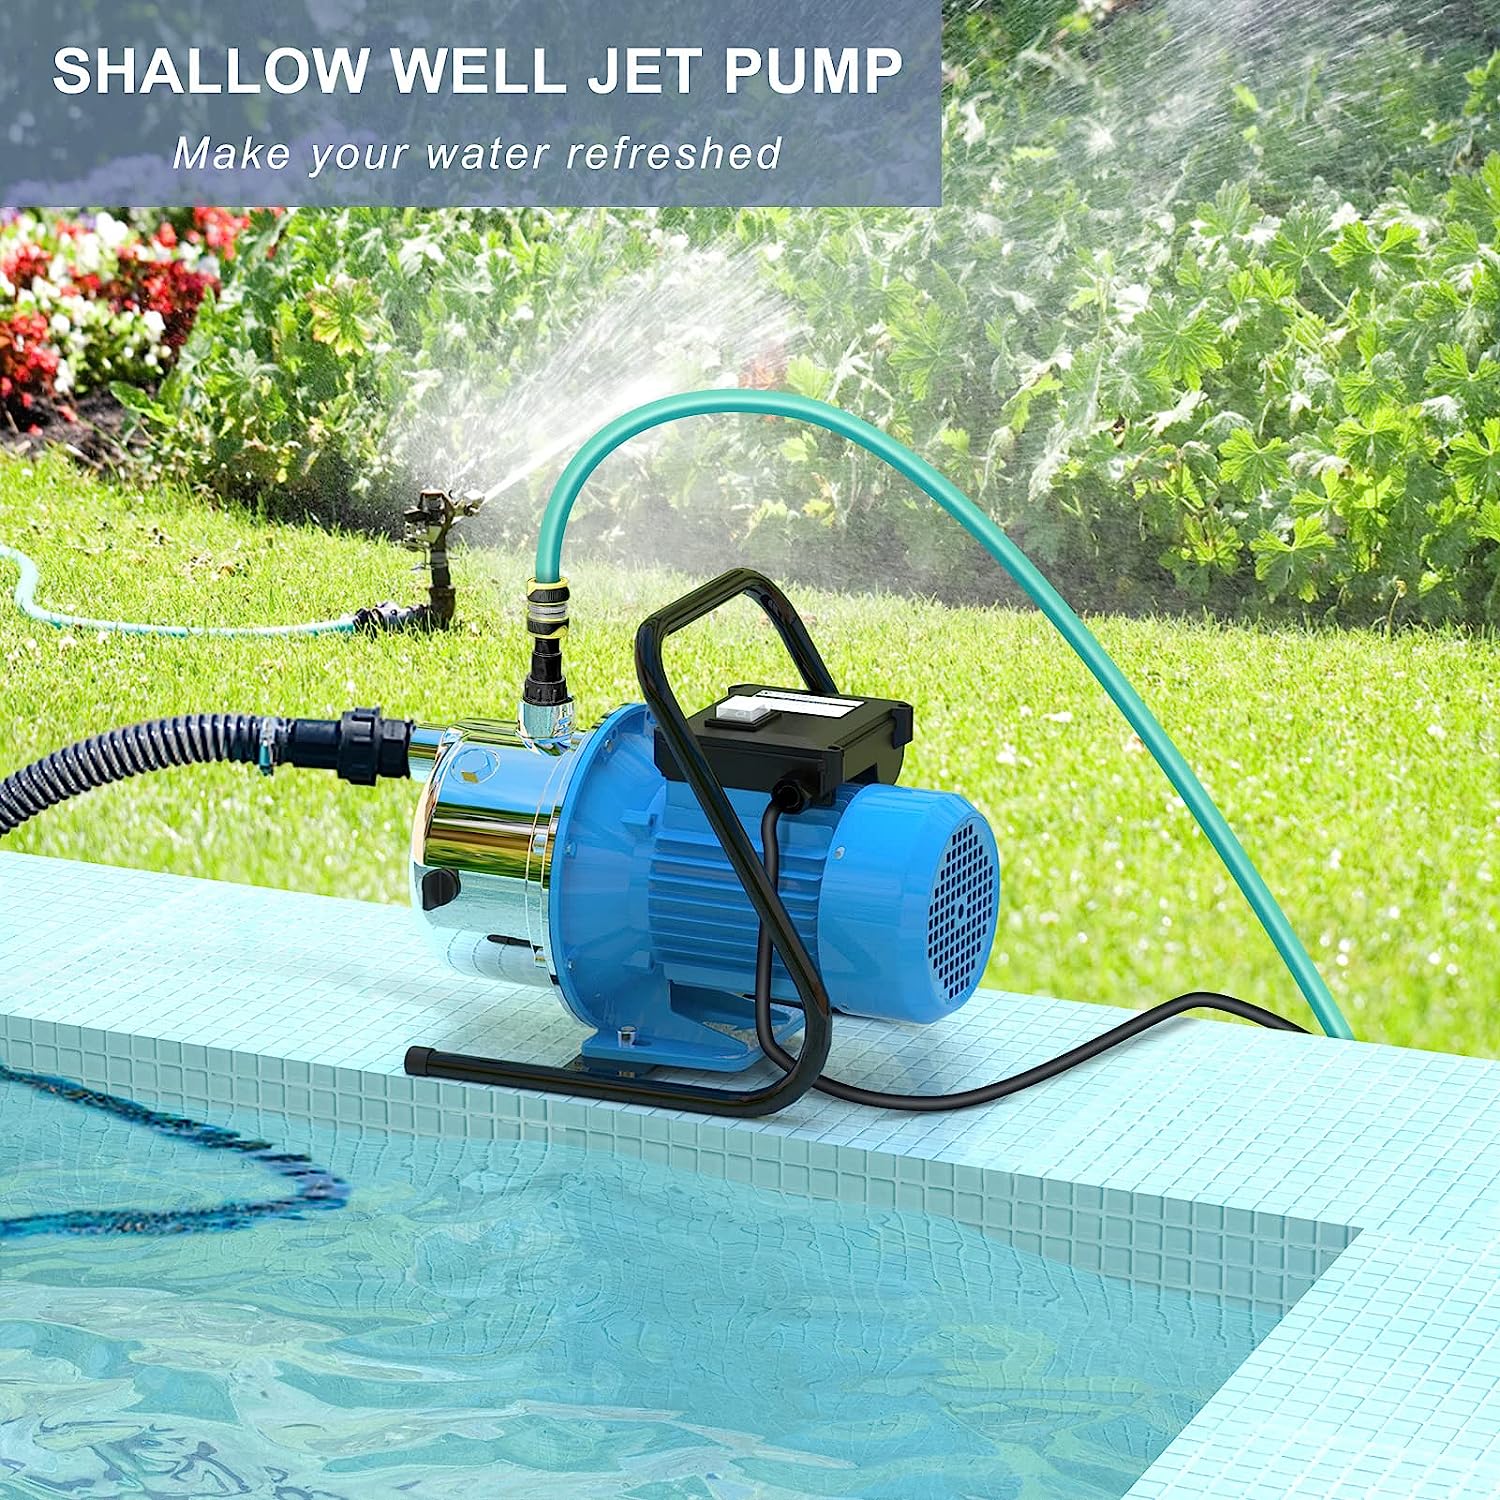 Stainless Steel Electronic Portable Shallow Well Pump Booster Pump Lawn  Sprinkling Pump Home Garden Water Pump (1.6HP)